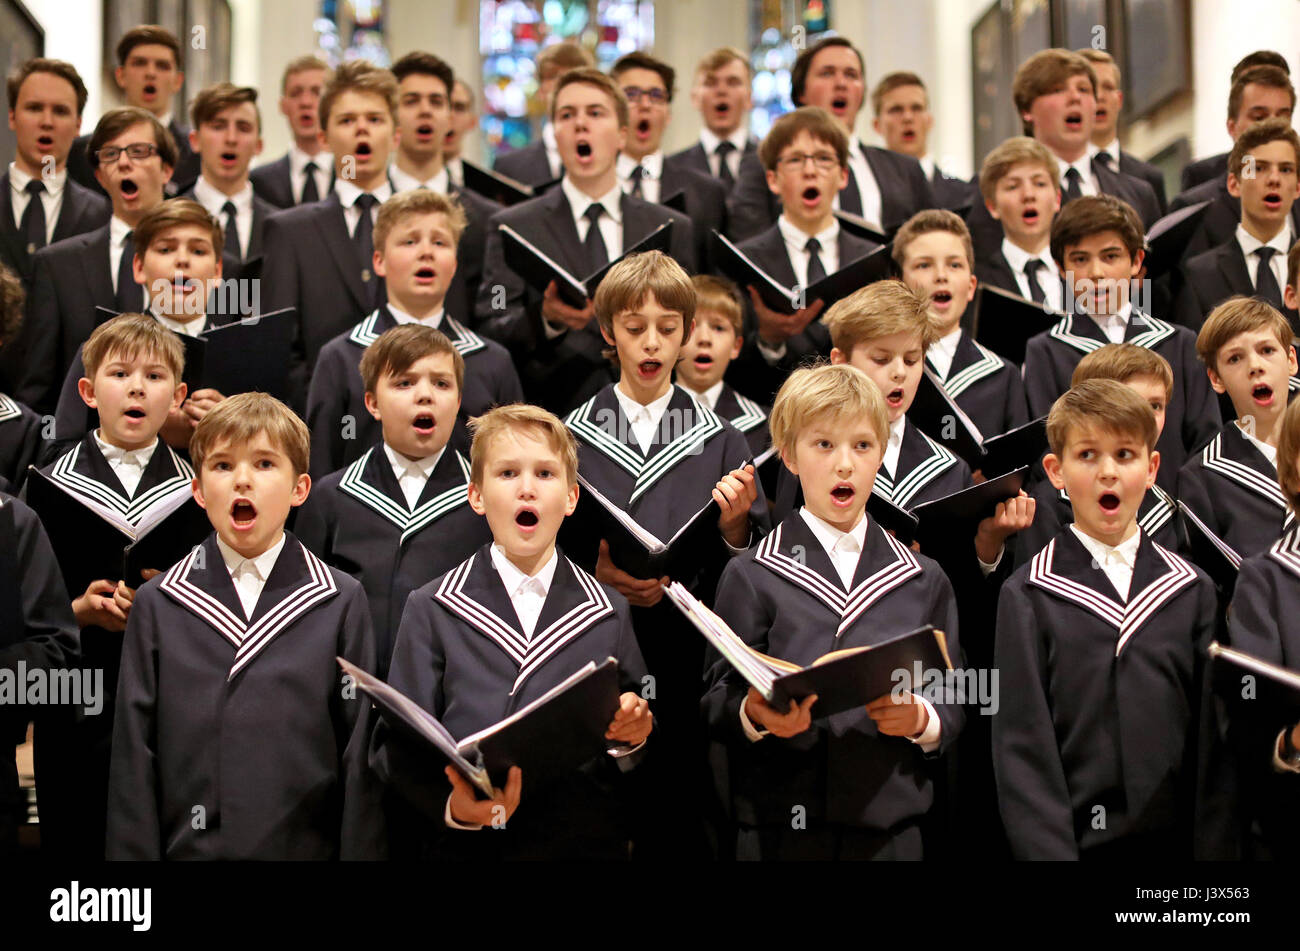 Leipzig, Germany. 5th May, 2017. The St. Thomas Choir of Leipzig in performance in the St. Thomas Church in Leipzig, Germany, 5 May 2017. The world-famous boys choir is over 800 years. Twelve members are finishing school this year, marking a period of change in the choir. The choirboys set to replace them will have to complete an exam before joining. Some 85,000 visitors attend the choir's performance each year. Photo: Jan Woitas/dpa-Zentralbild/dpa/Alamy Live News Stock Photo